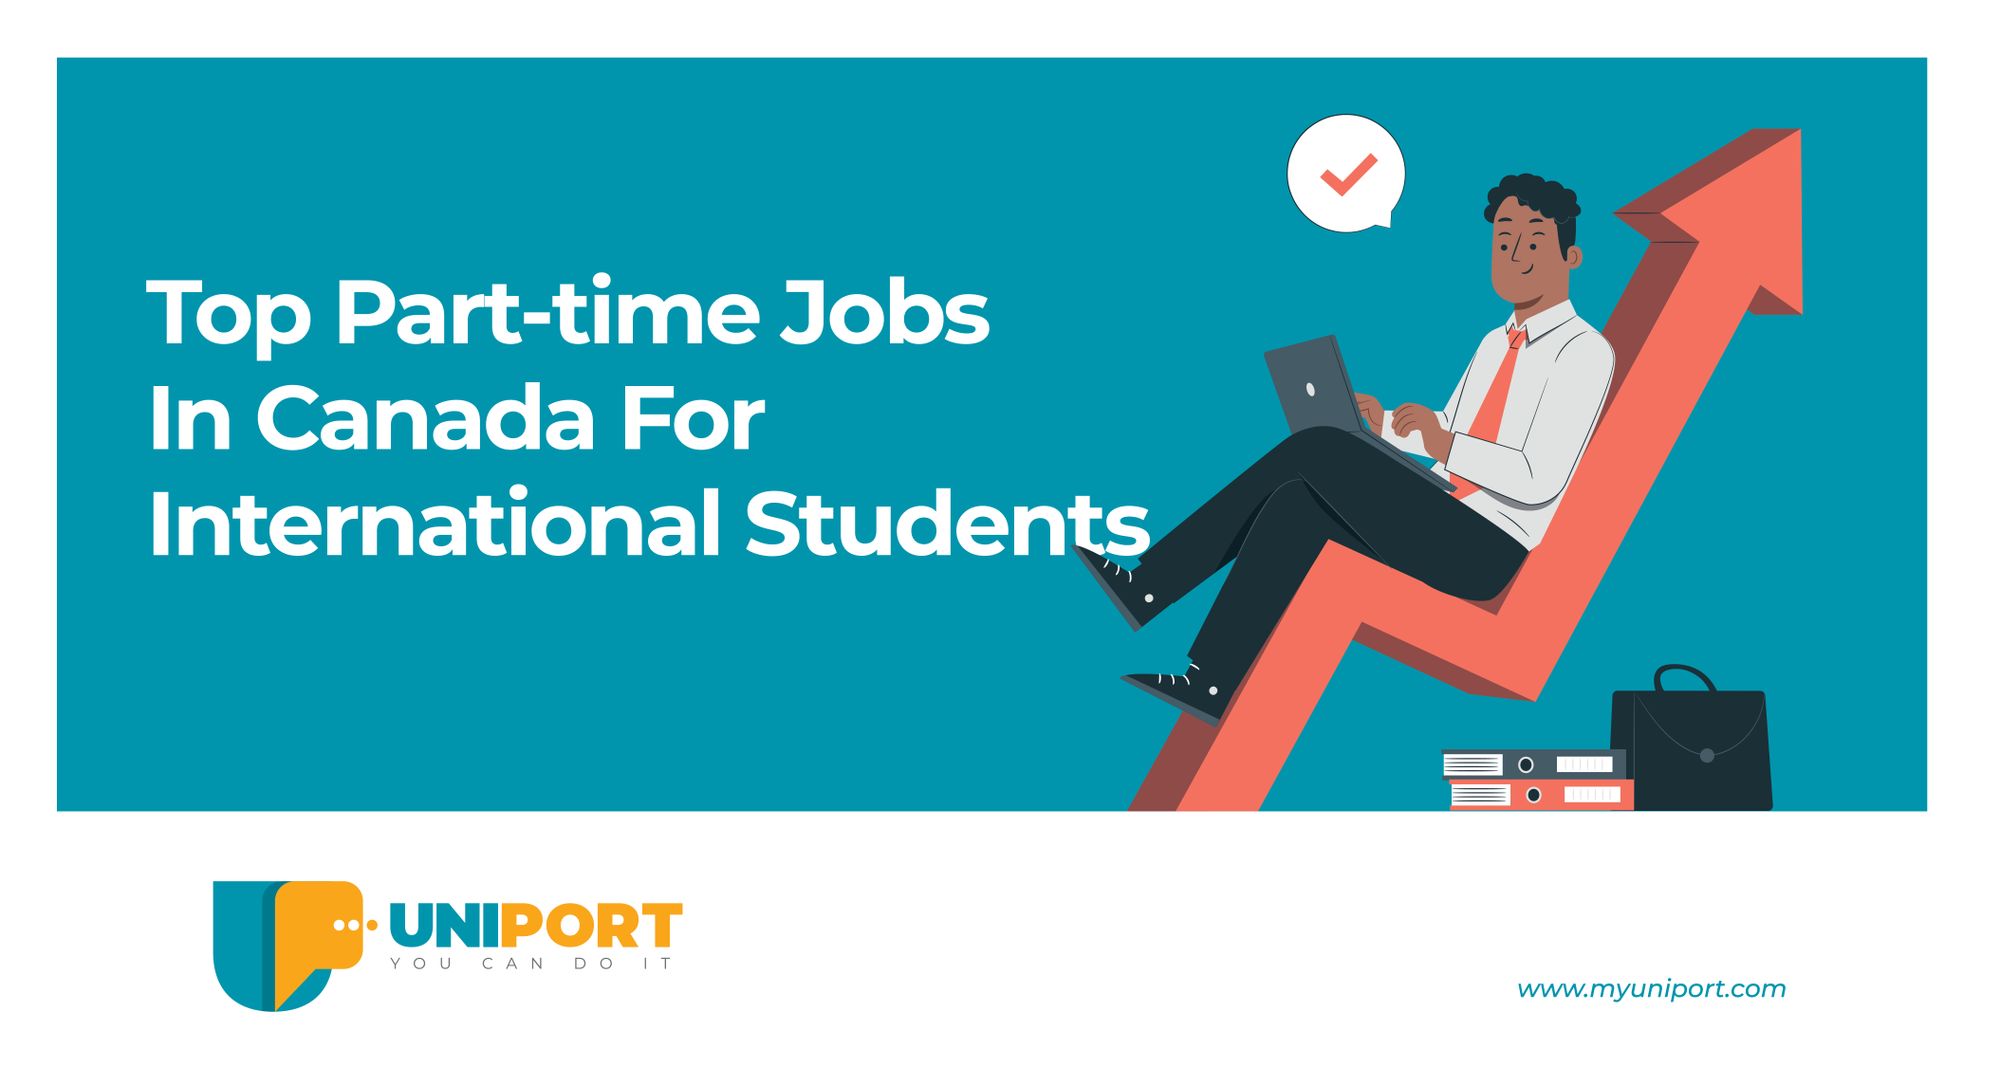 Top Part-time Jobs In Canada For International Students